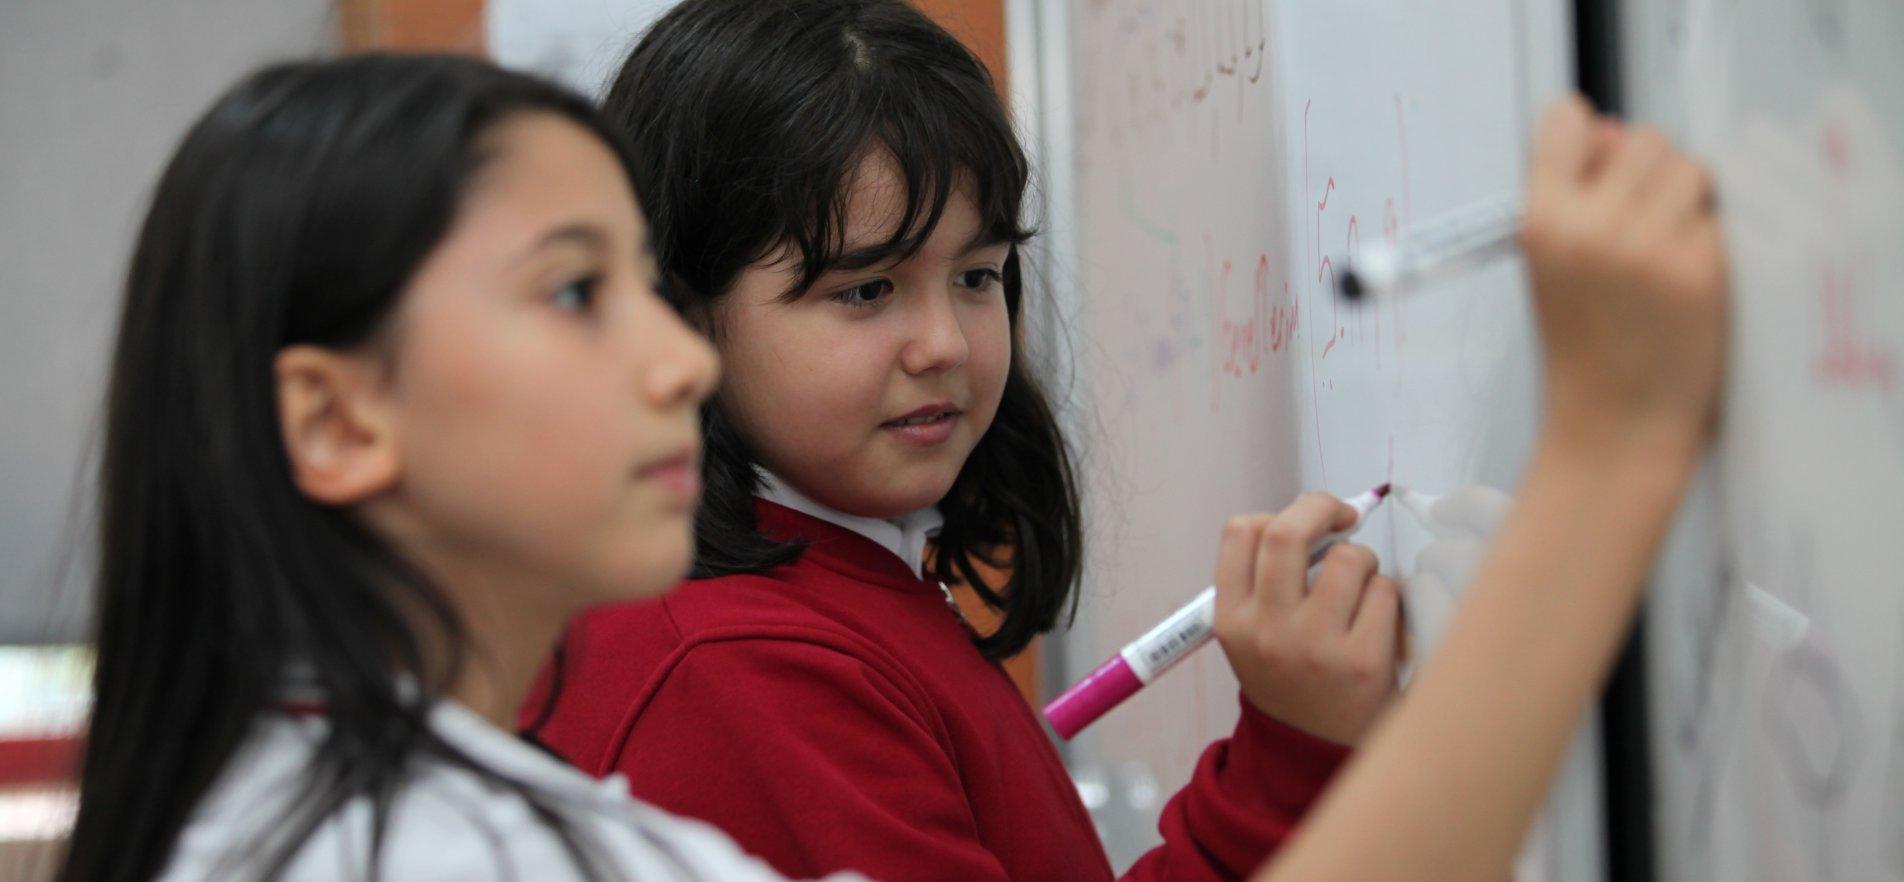 THE MINISTRY OF NATIONAL EDUCATION WILL RESHAPE TURKISH AND FOREIGN LANGUAGE EDUCATION